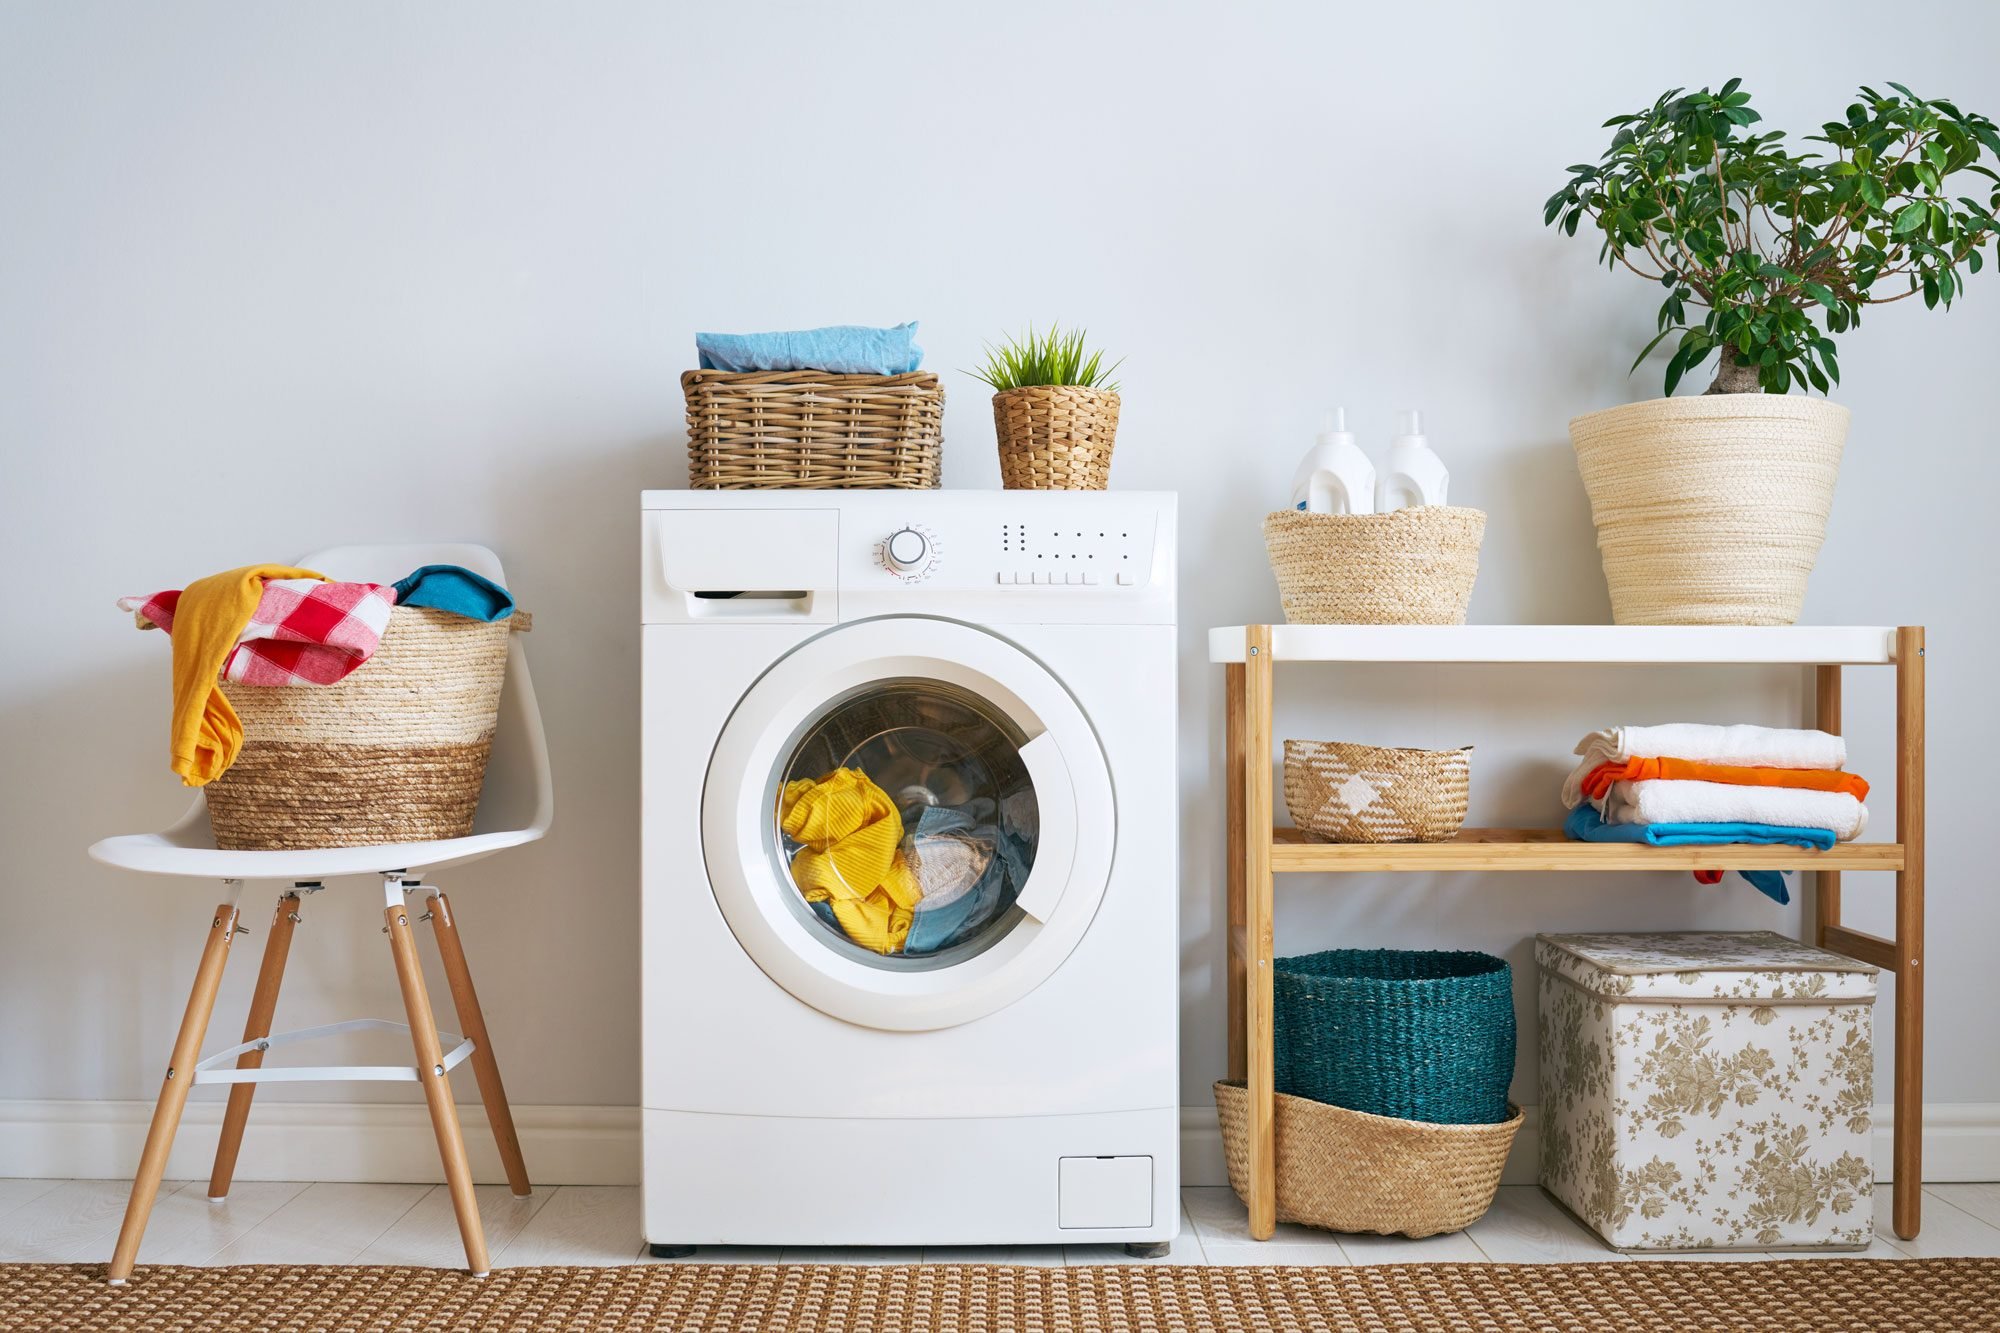 18 Great Laundry Room Design Ideas That'll Make You Want To Do Laundry